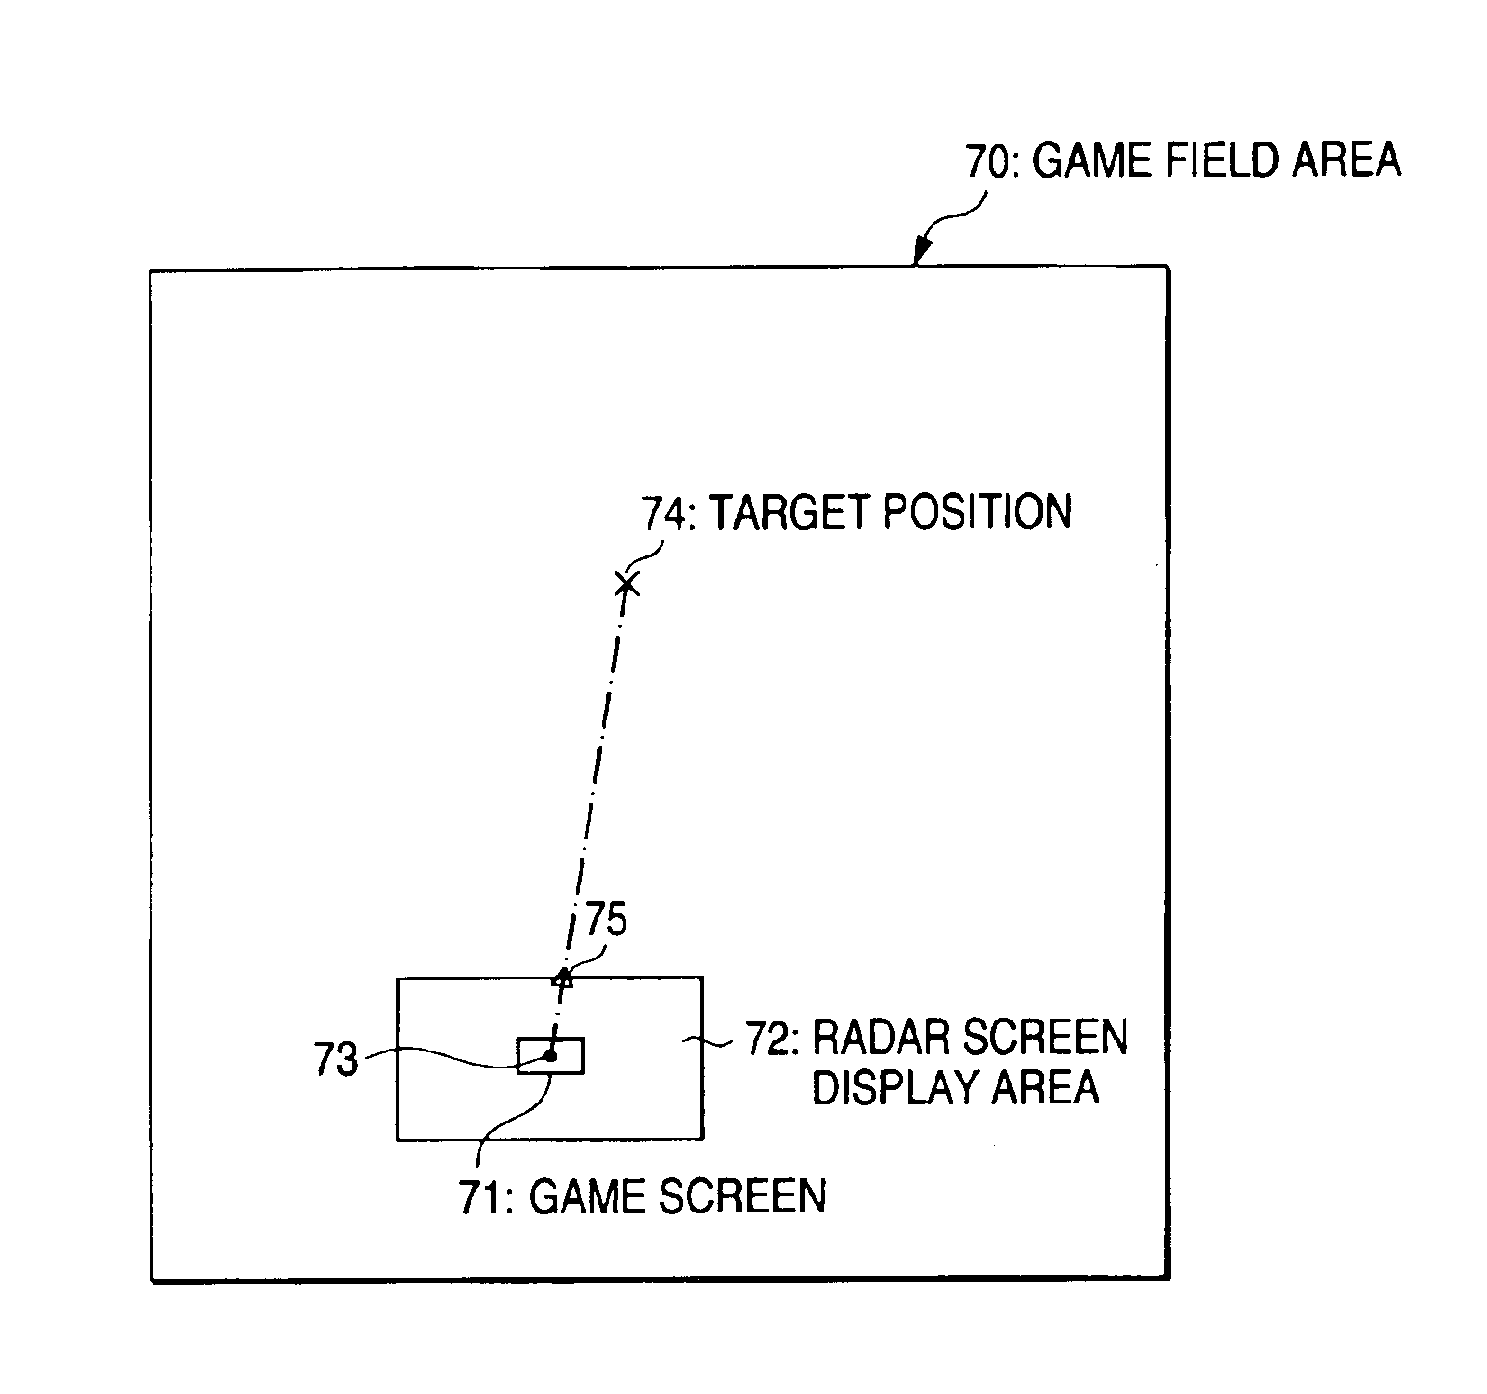 Video game with sub-display for tracking target